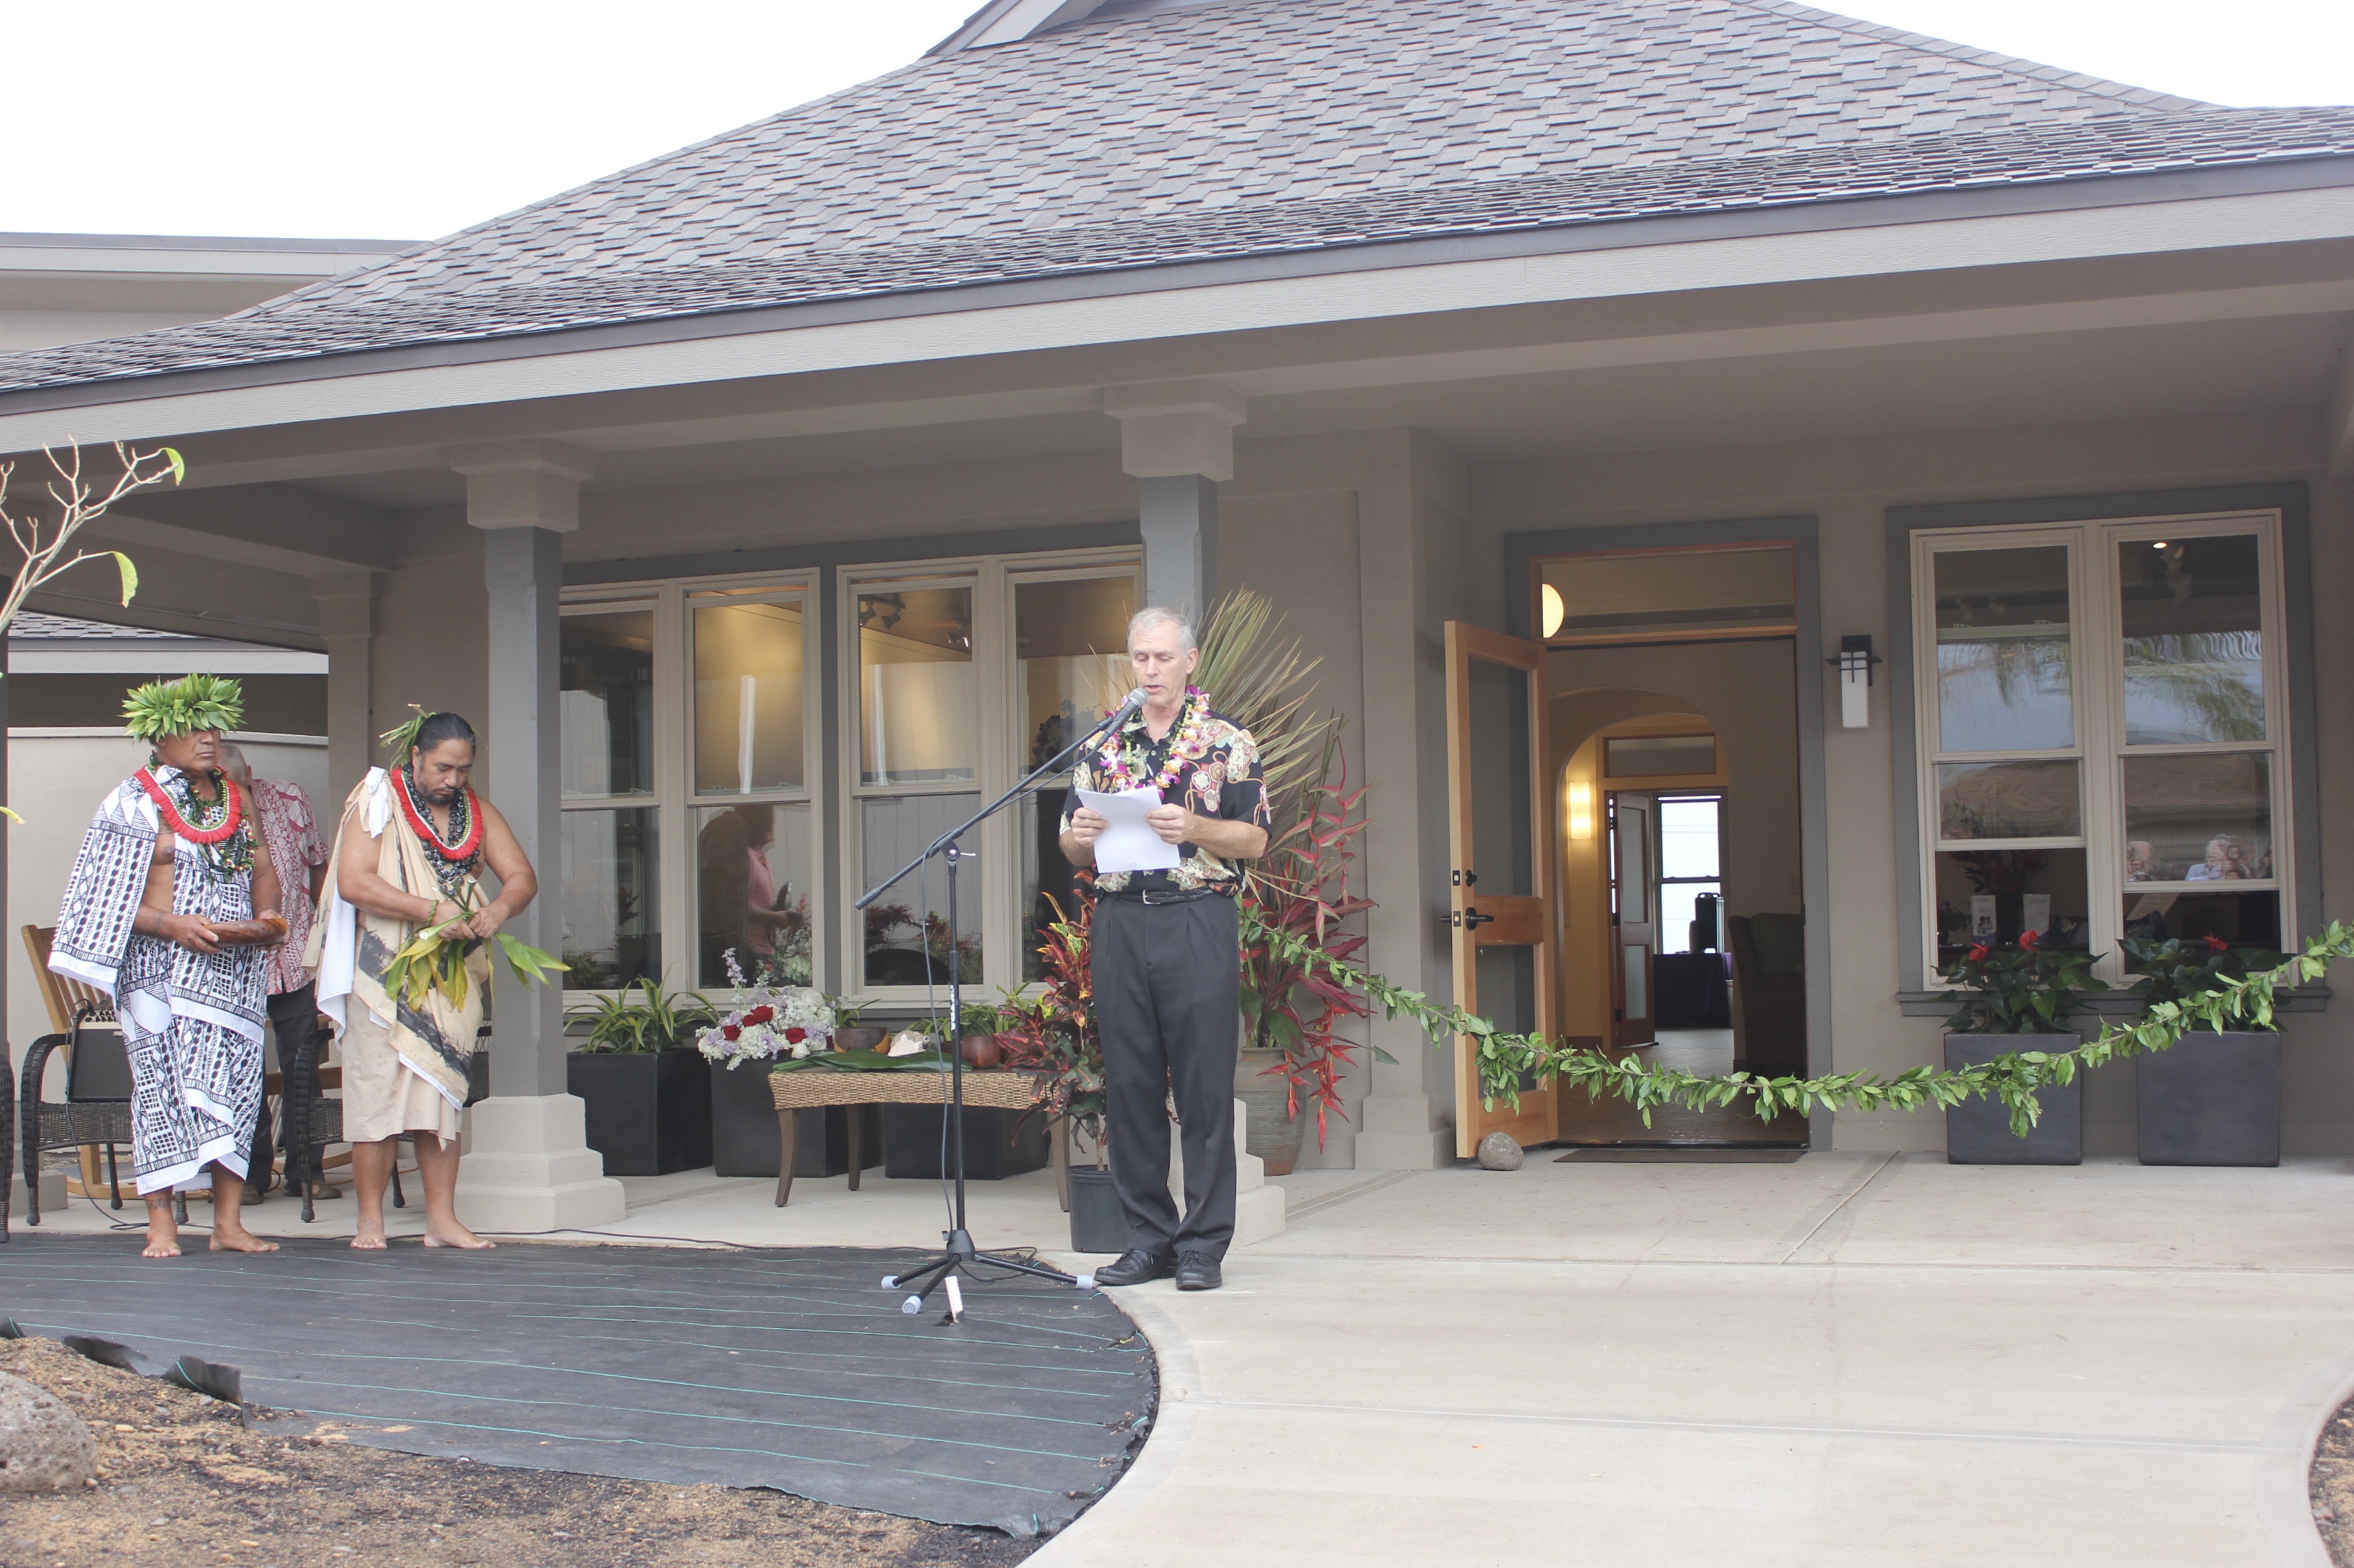 Greg LaGoy, Executive Director of Hospice Maui speaks at the Opening blessing event for Hospice Maui Hale. PC: 12.1.16 Astrid Grupenhoff